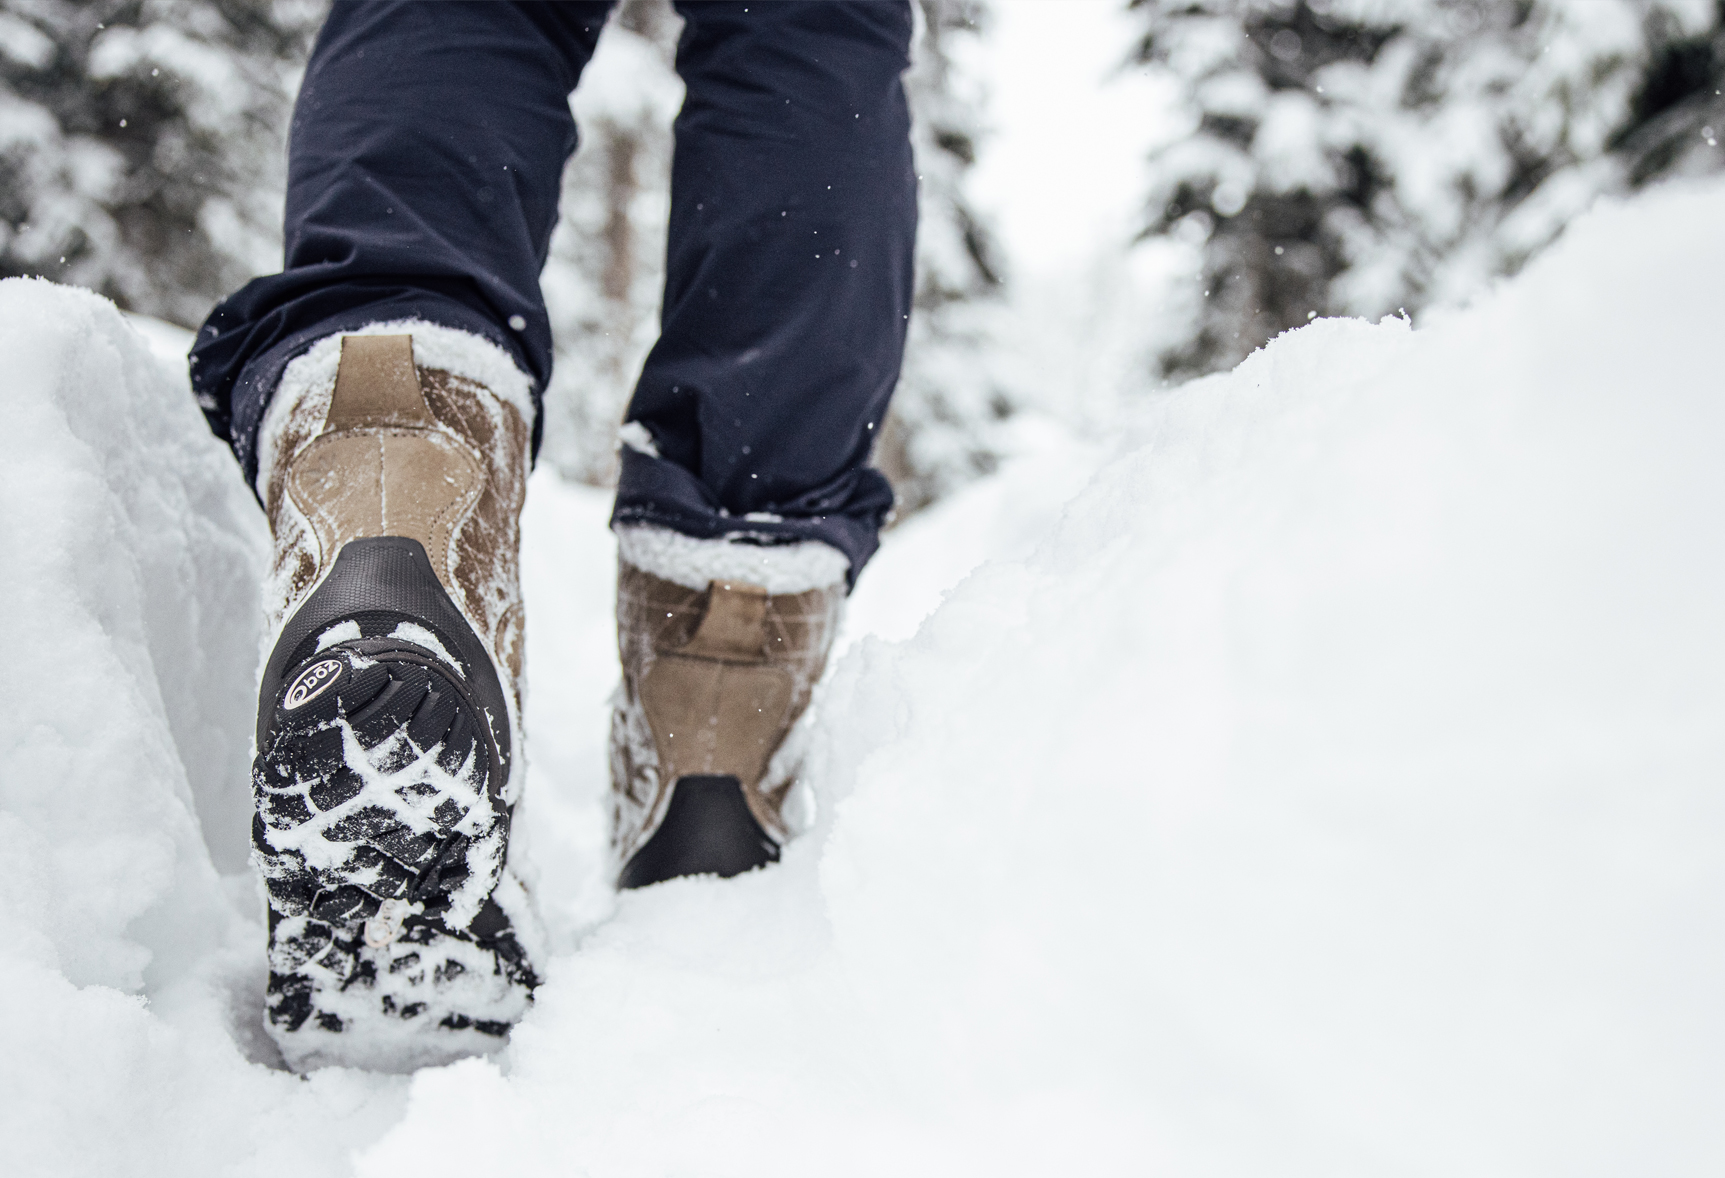 Women's Winter Boots and Insulated Footwear - Oboz Footwear - Oboz